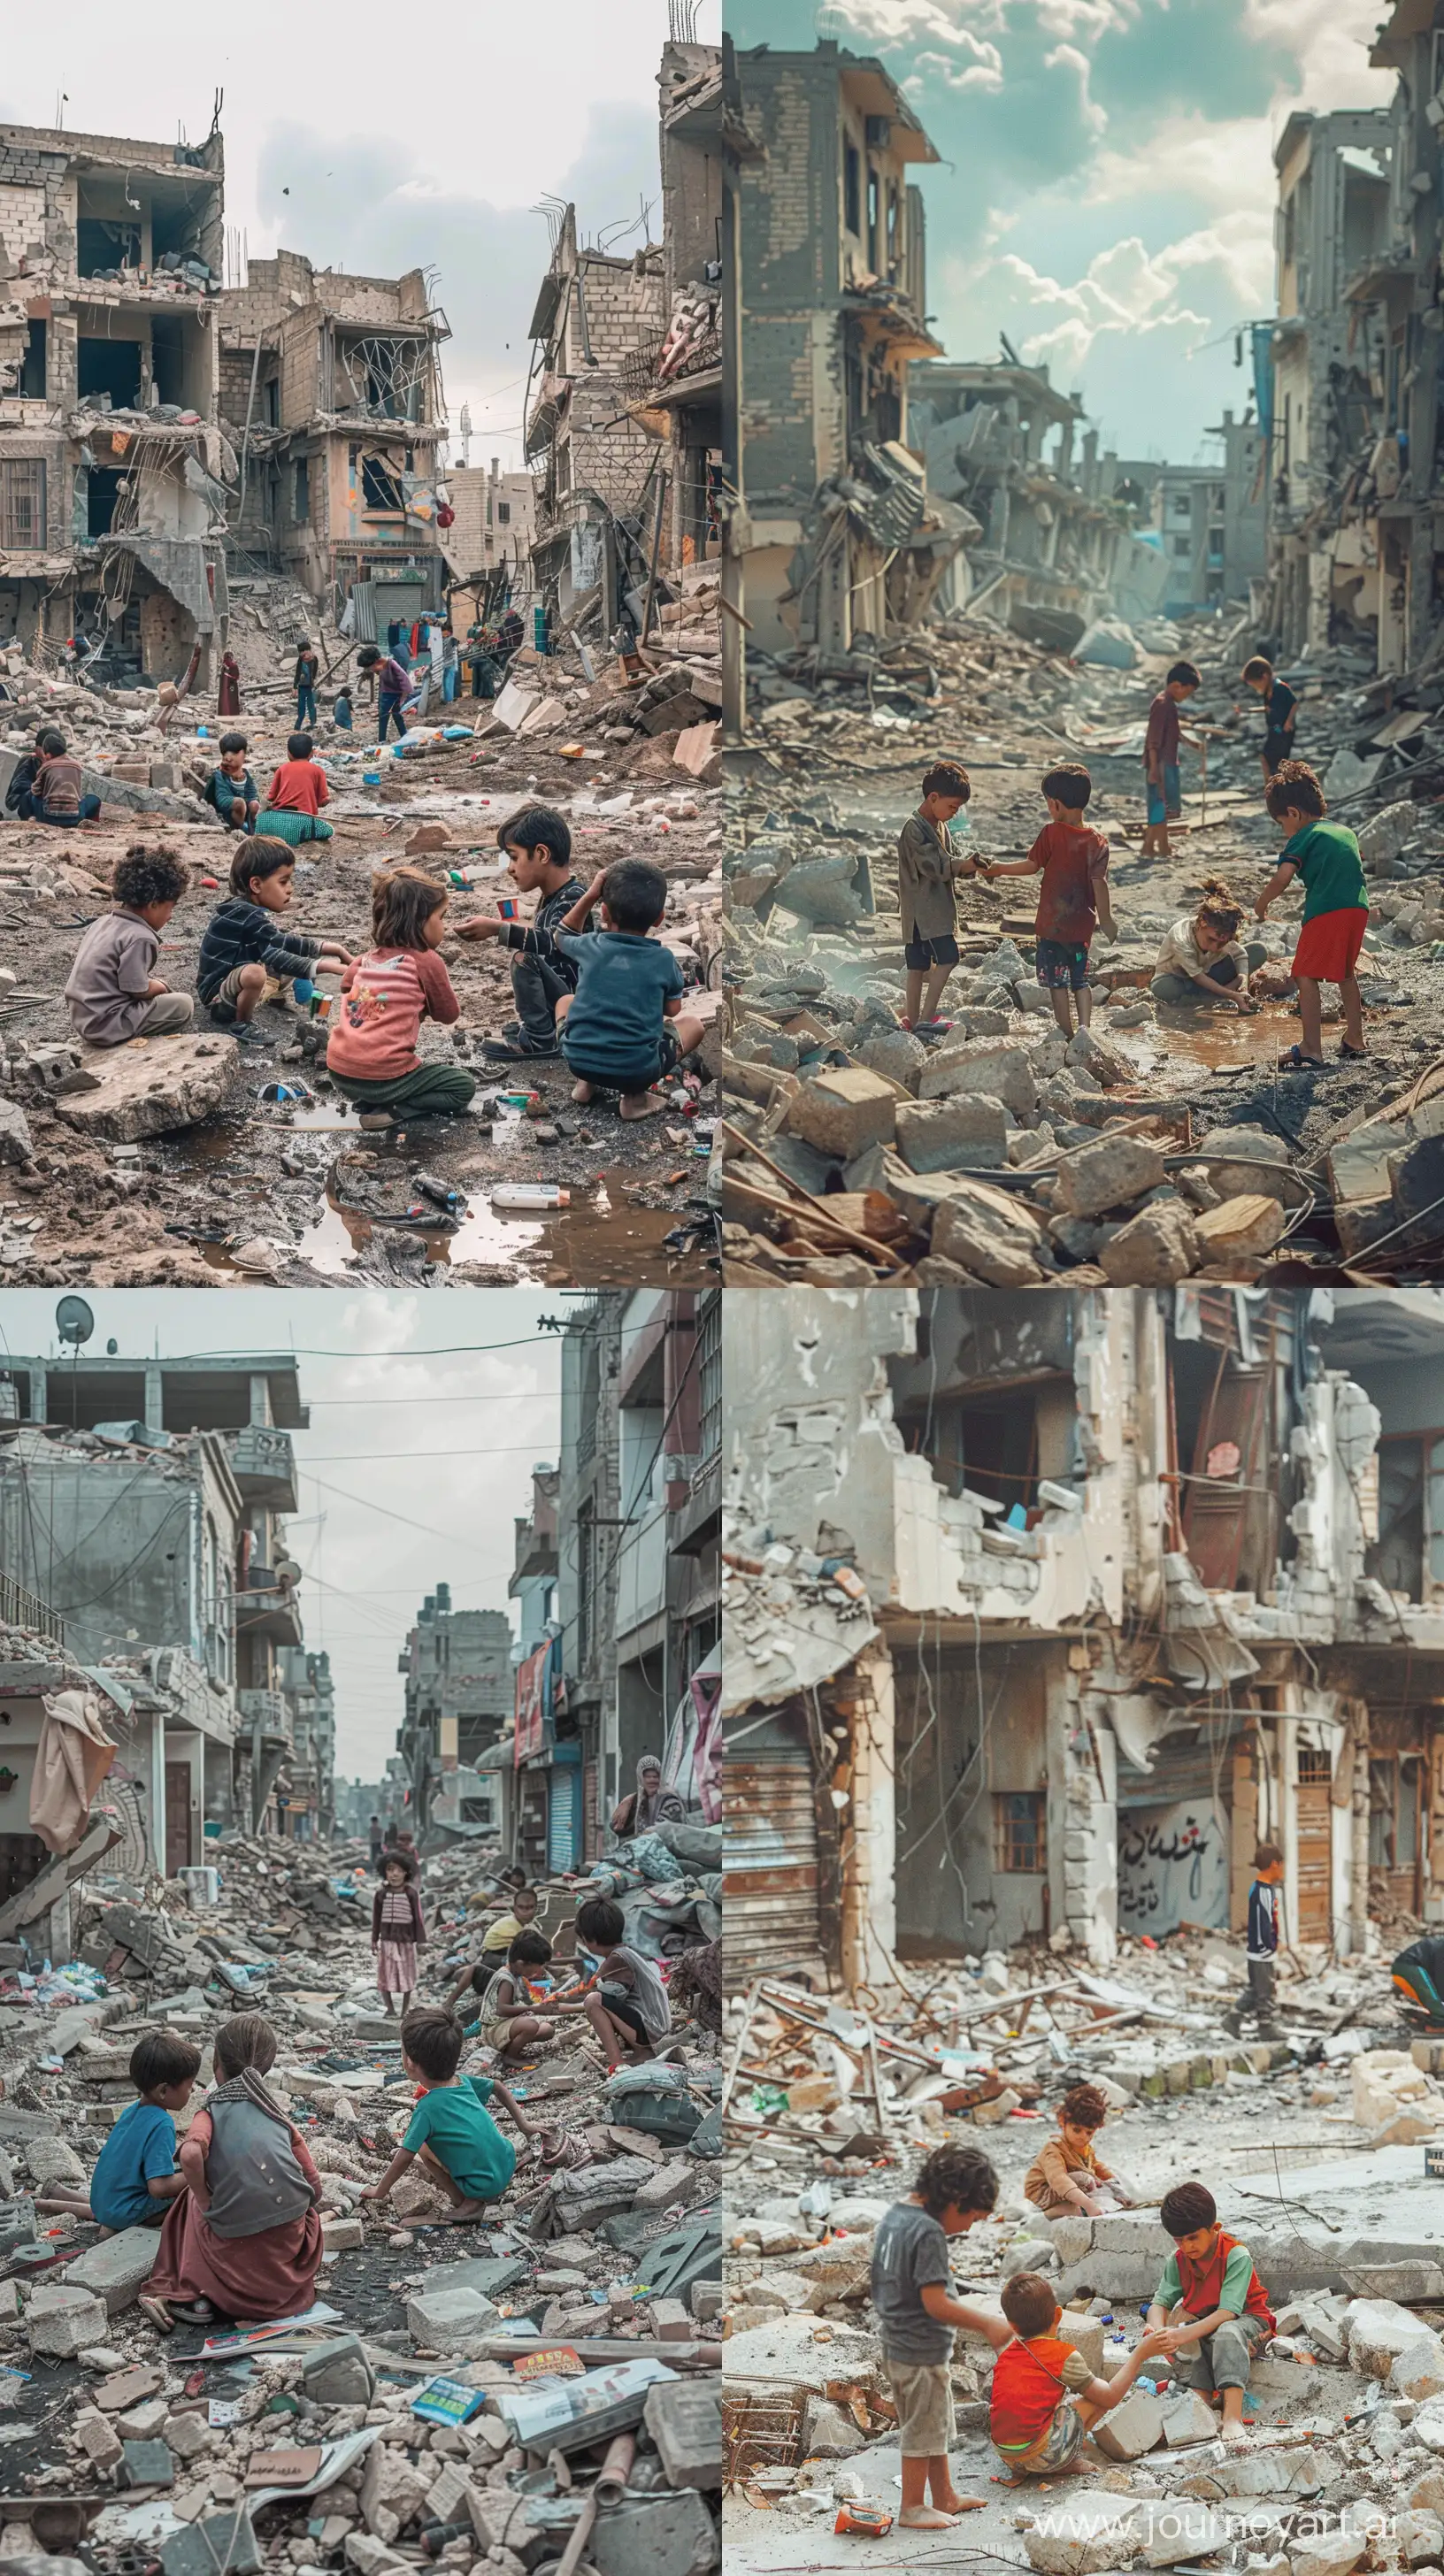 Create a narrative centered on a group of children creating their own world amongst the ruins of a bombed-out neighborhood, highlighting innocence amidst chaos. --ar 9:16 --v 6.0
